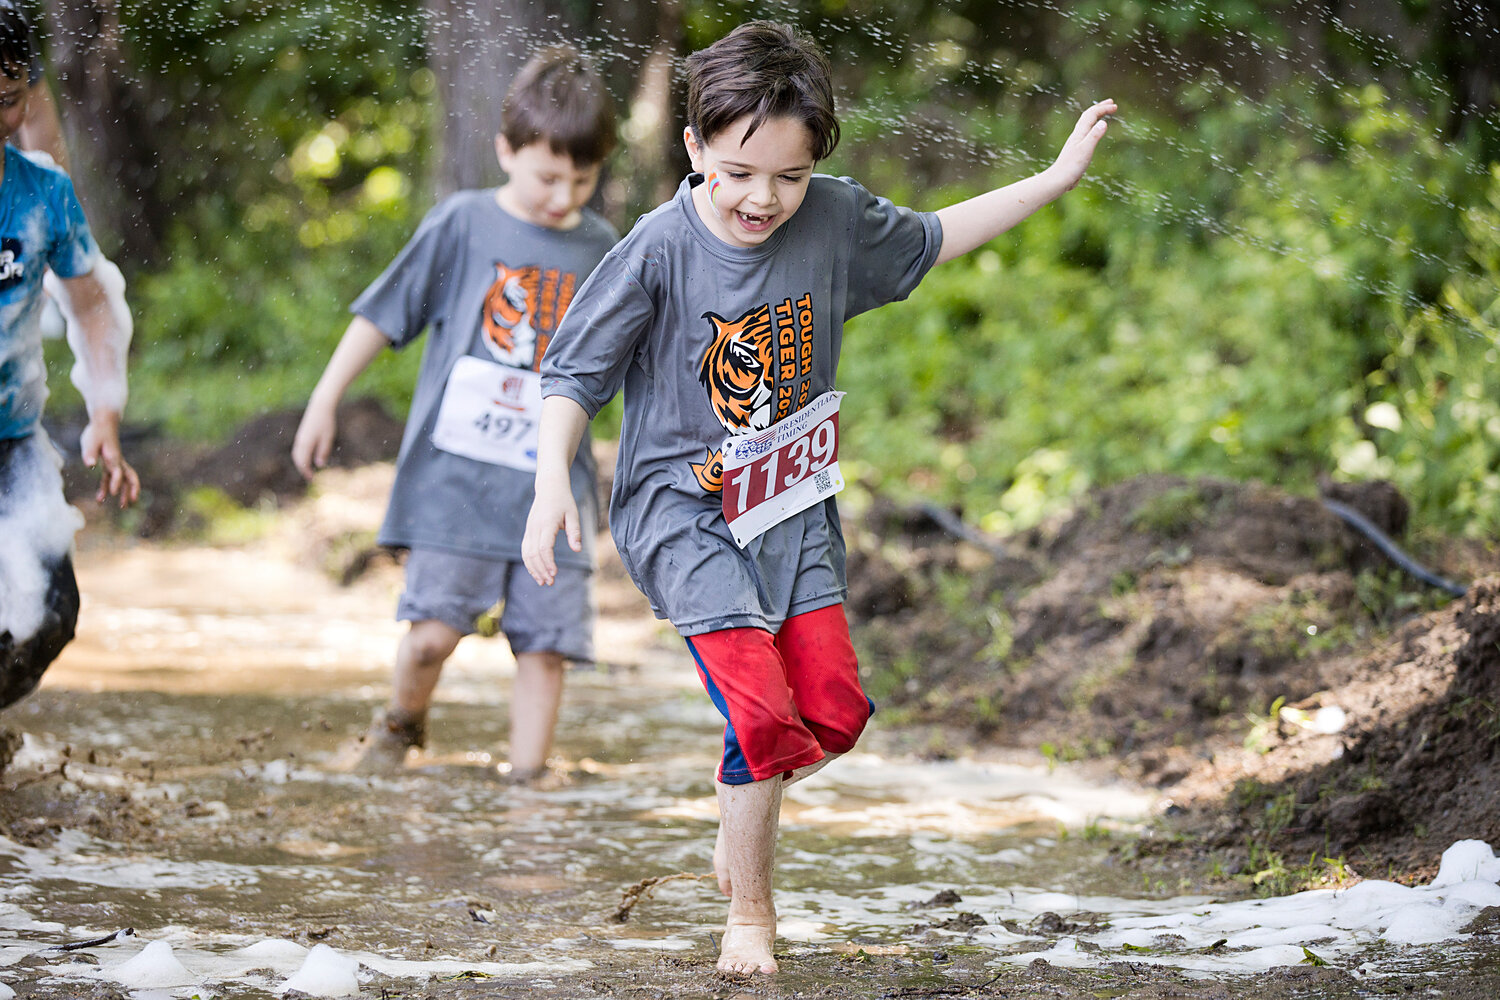 A young competitor chooses to go barefoot through a muddy obstacle.